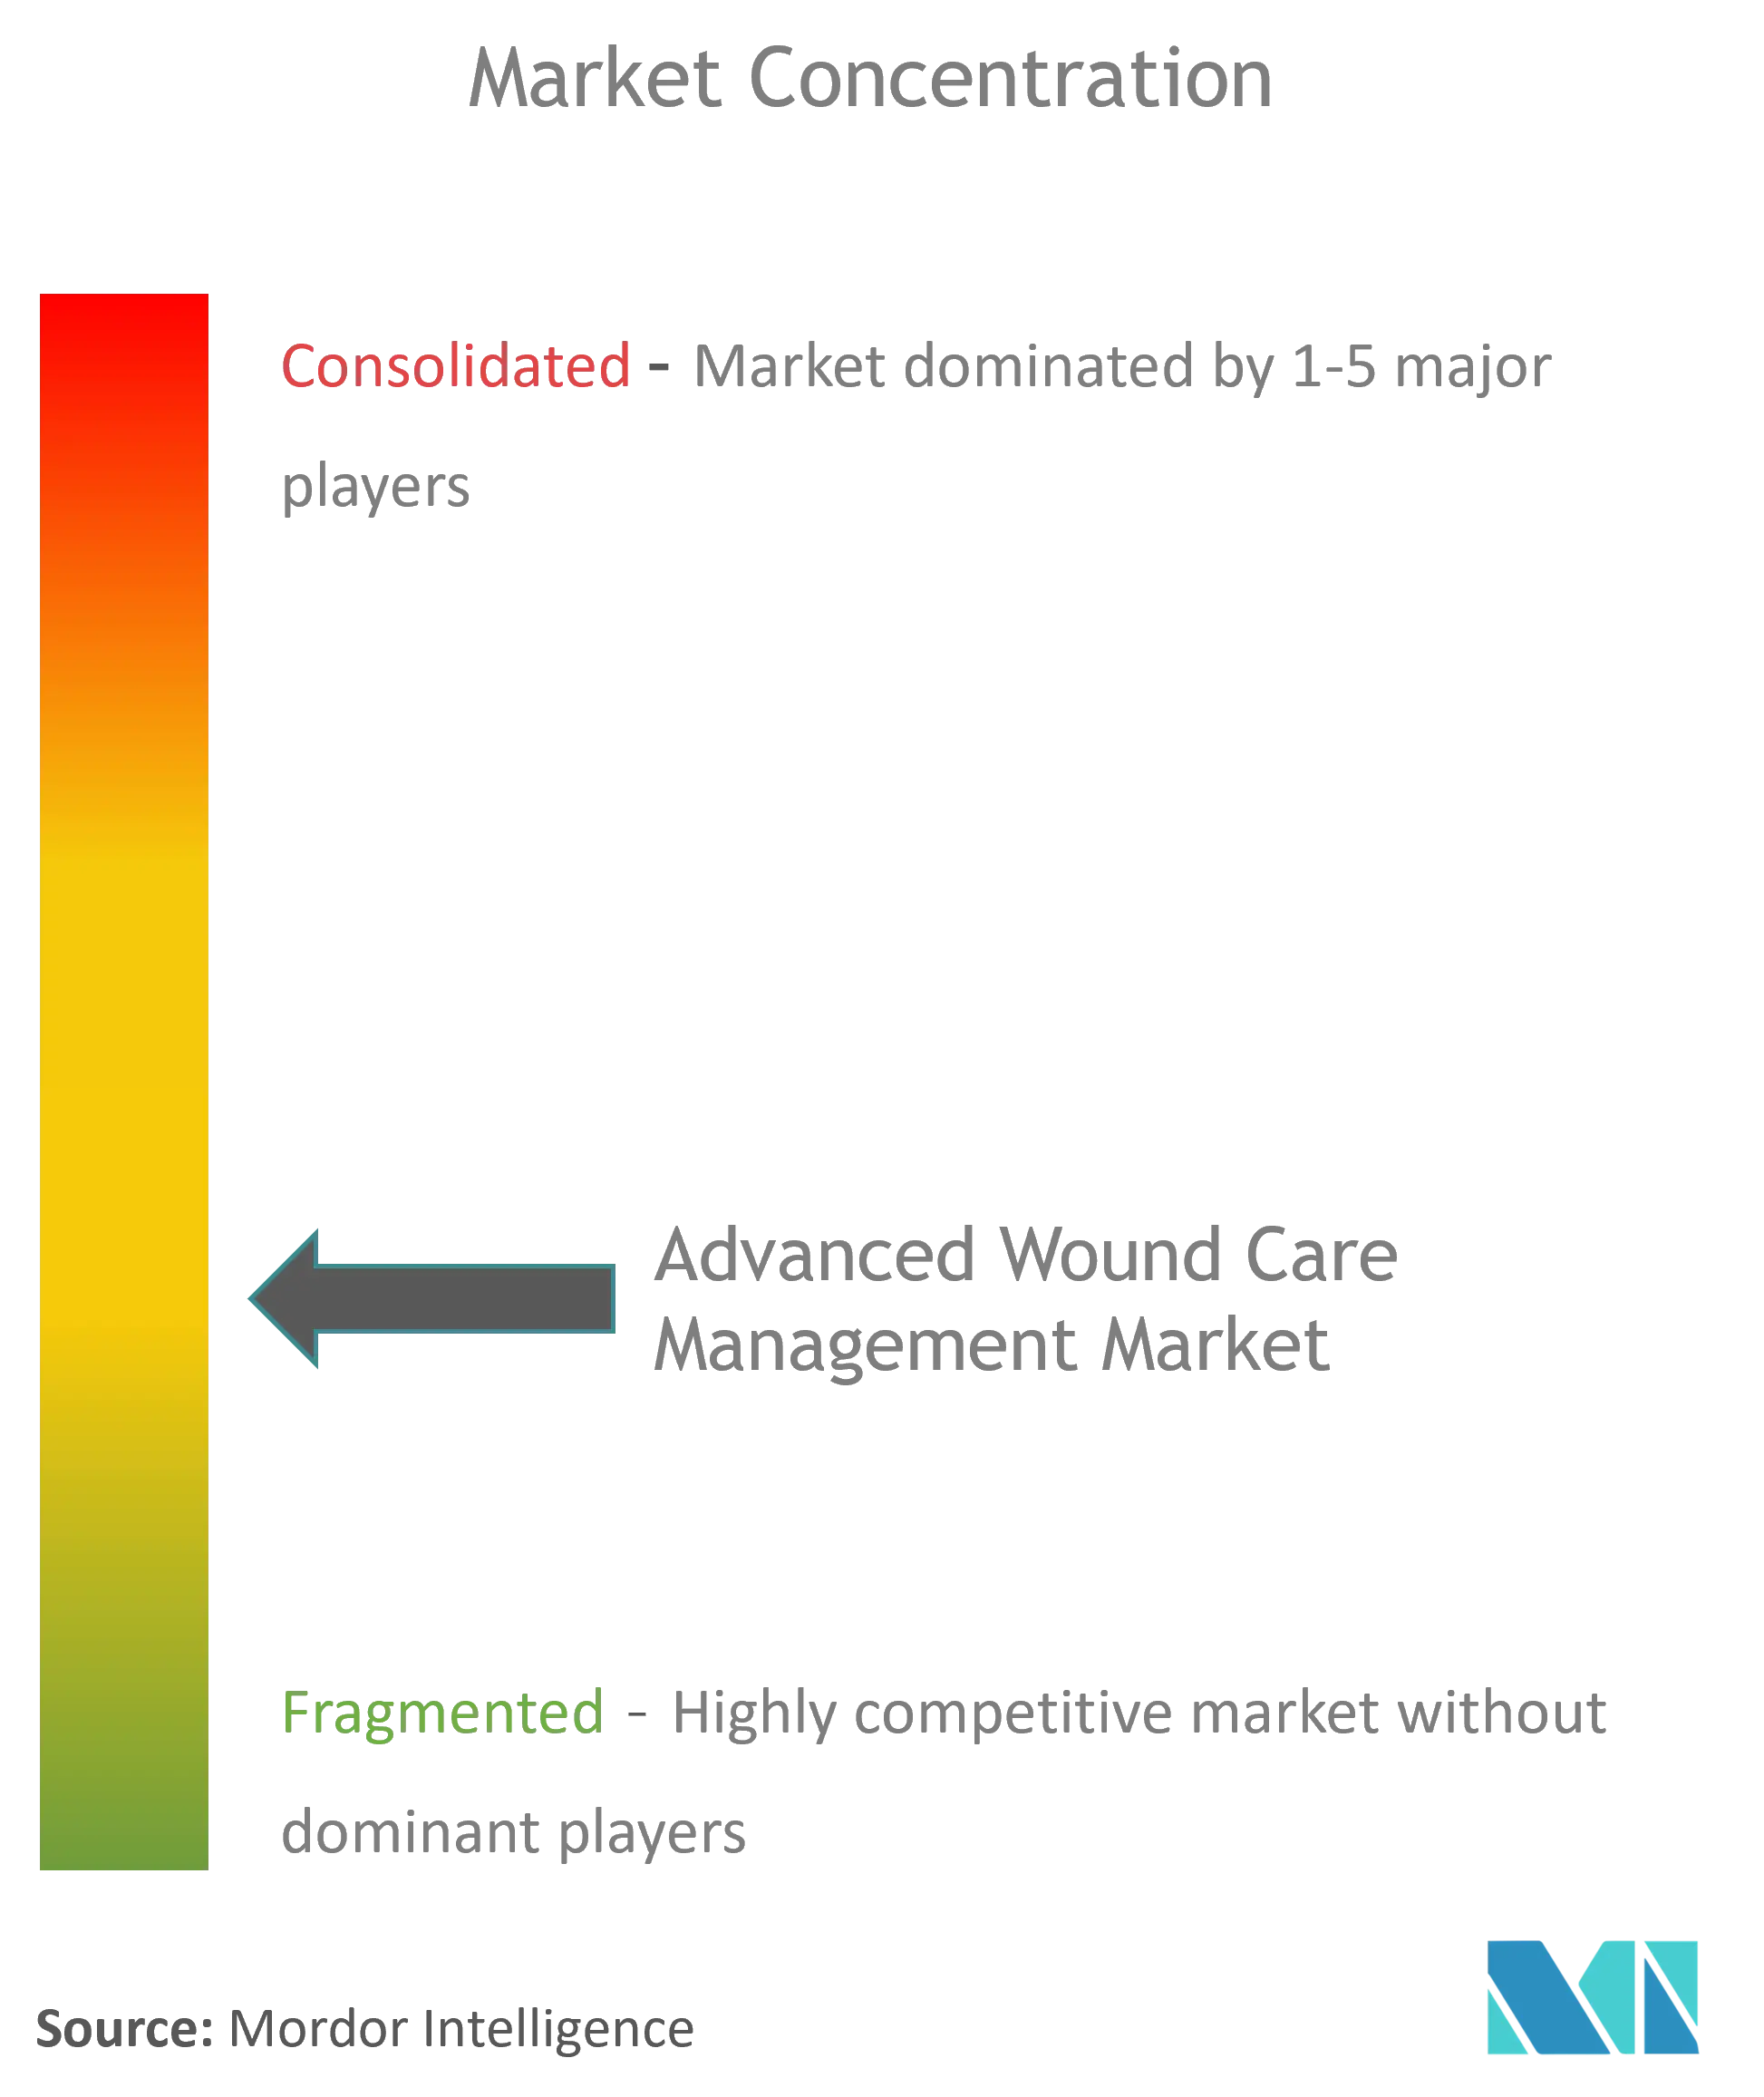 Global Advanced Wound Care Management Market Industry Concentration